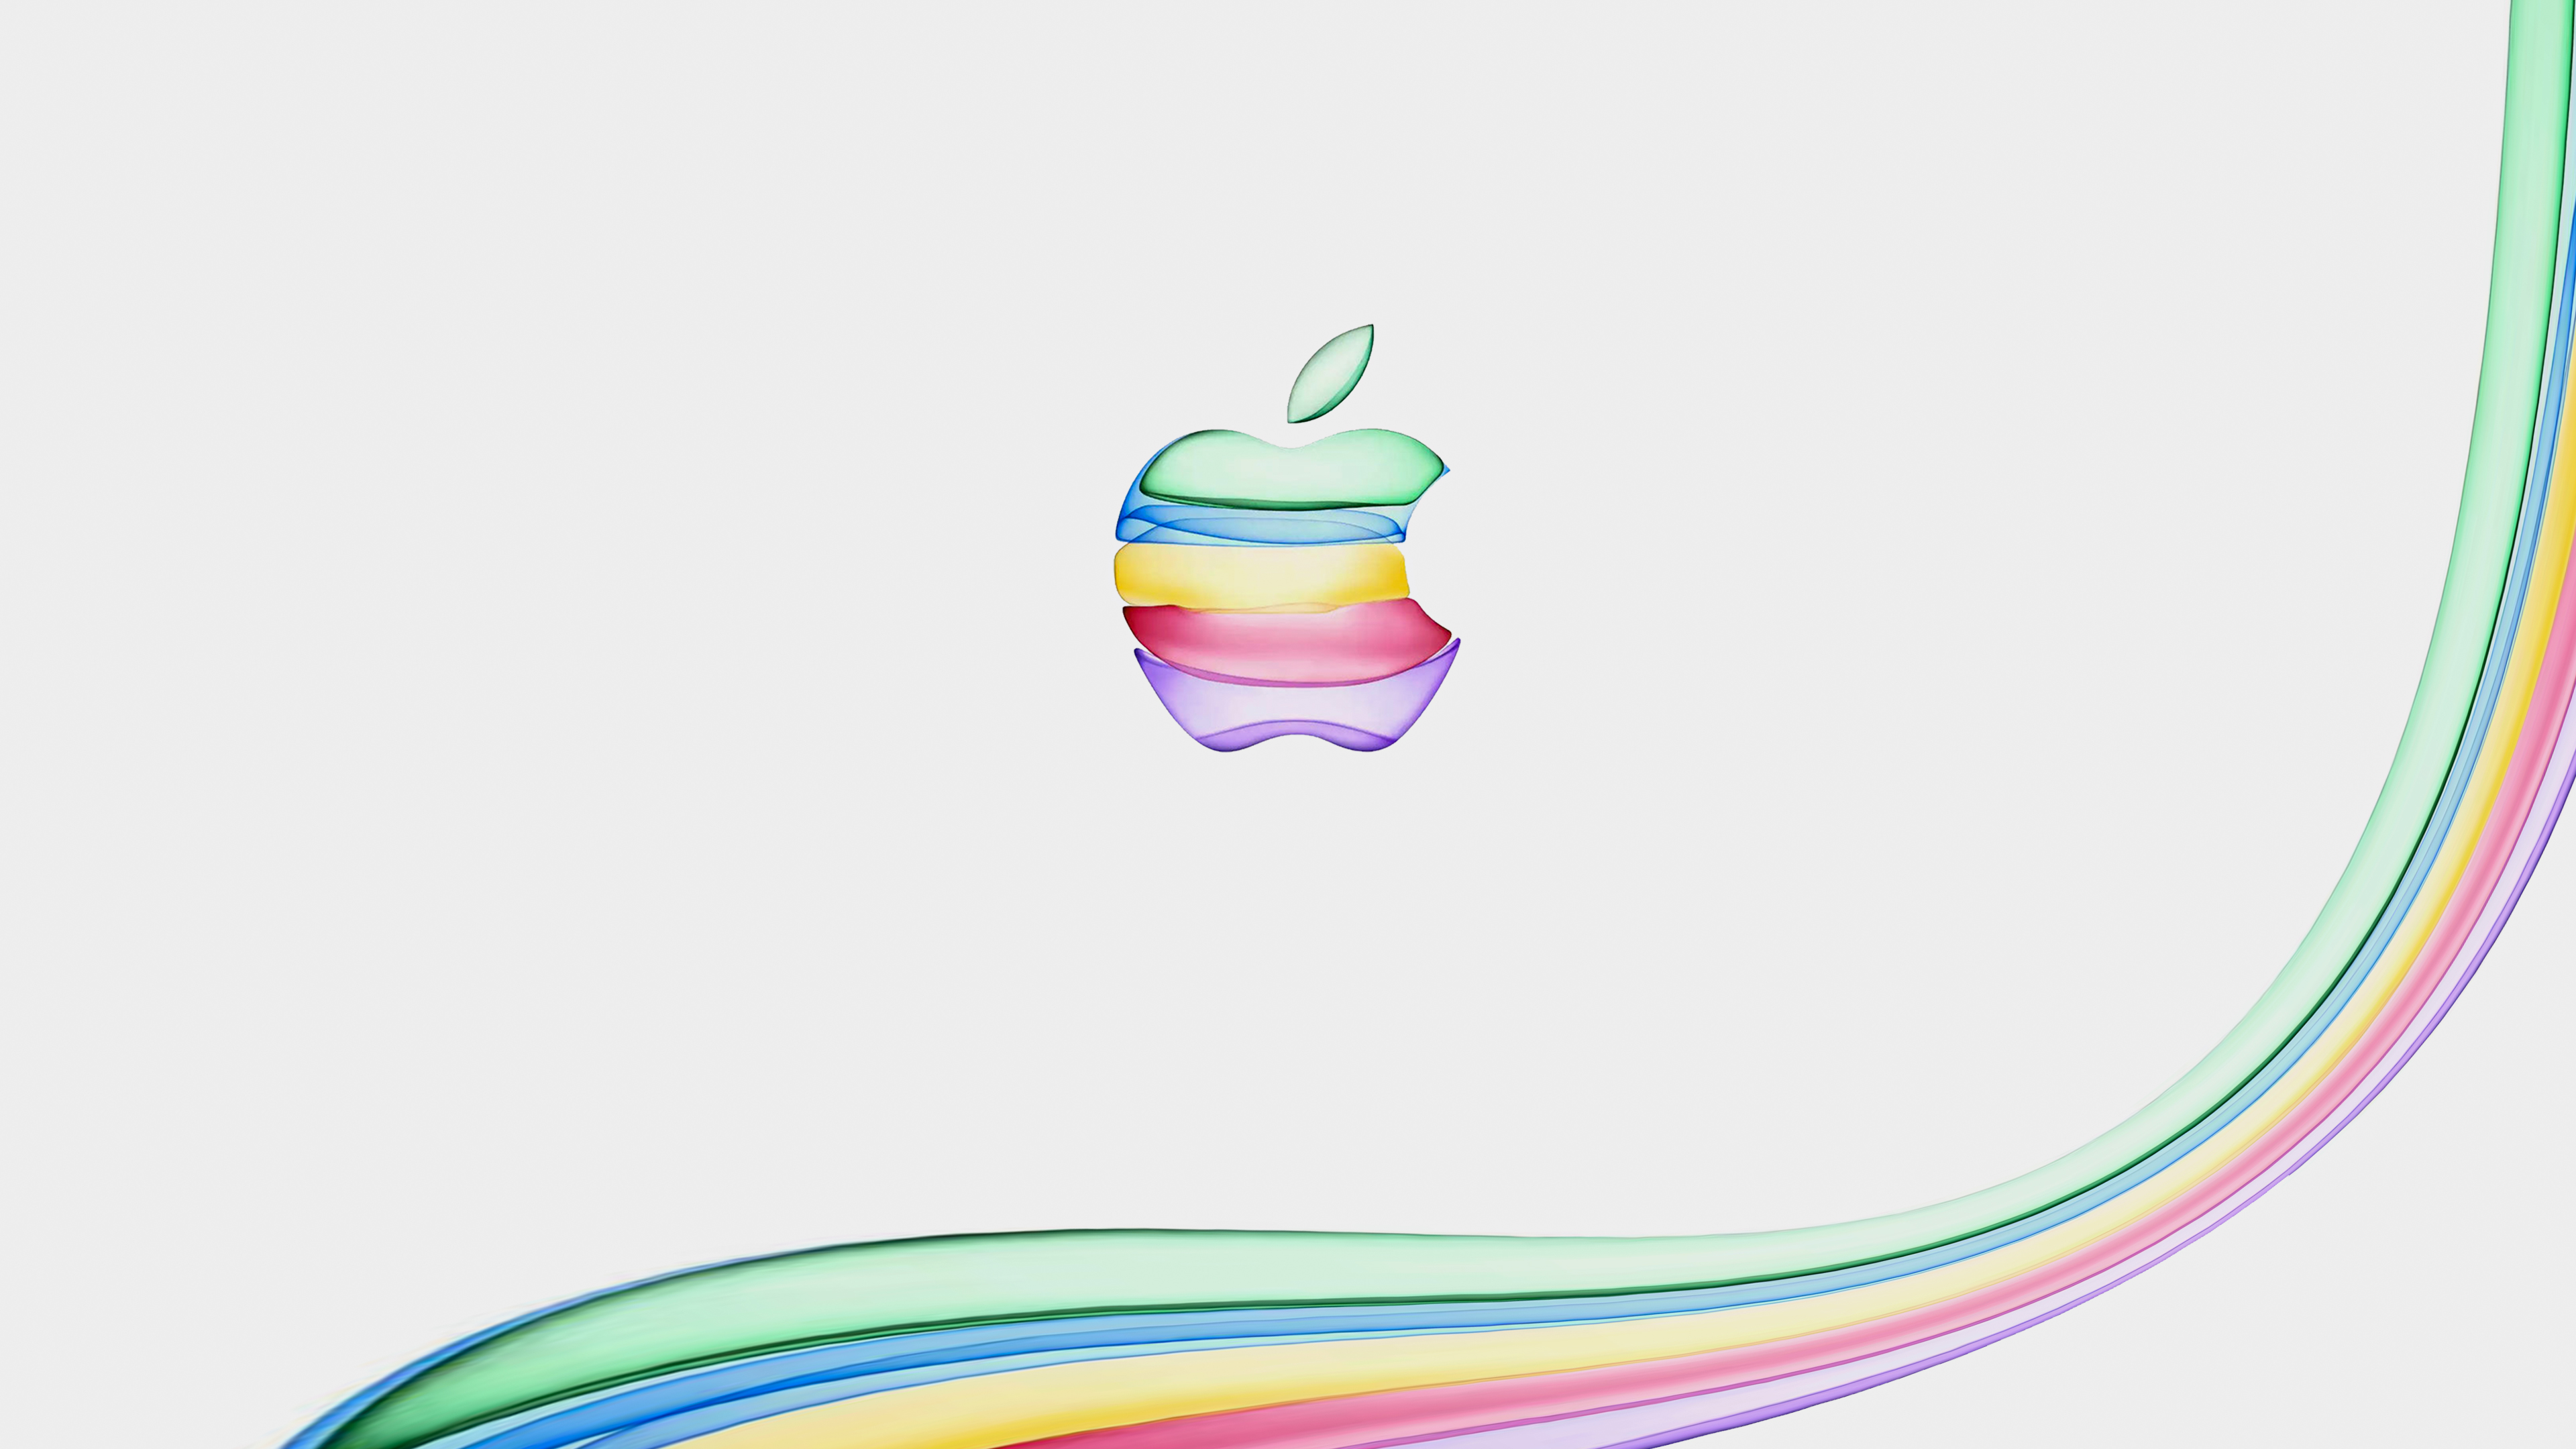 Wallpaper New 21 Imac Announcement Wallpaper Hello Image For Iphone Background Download Free Image